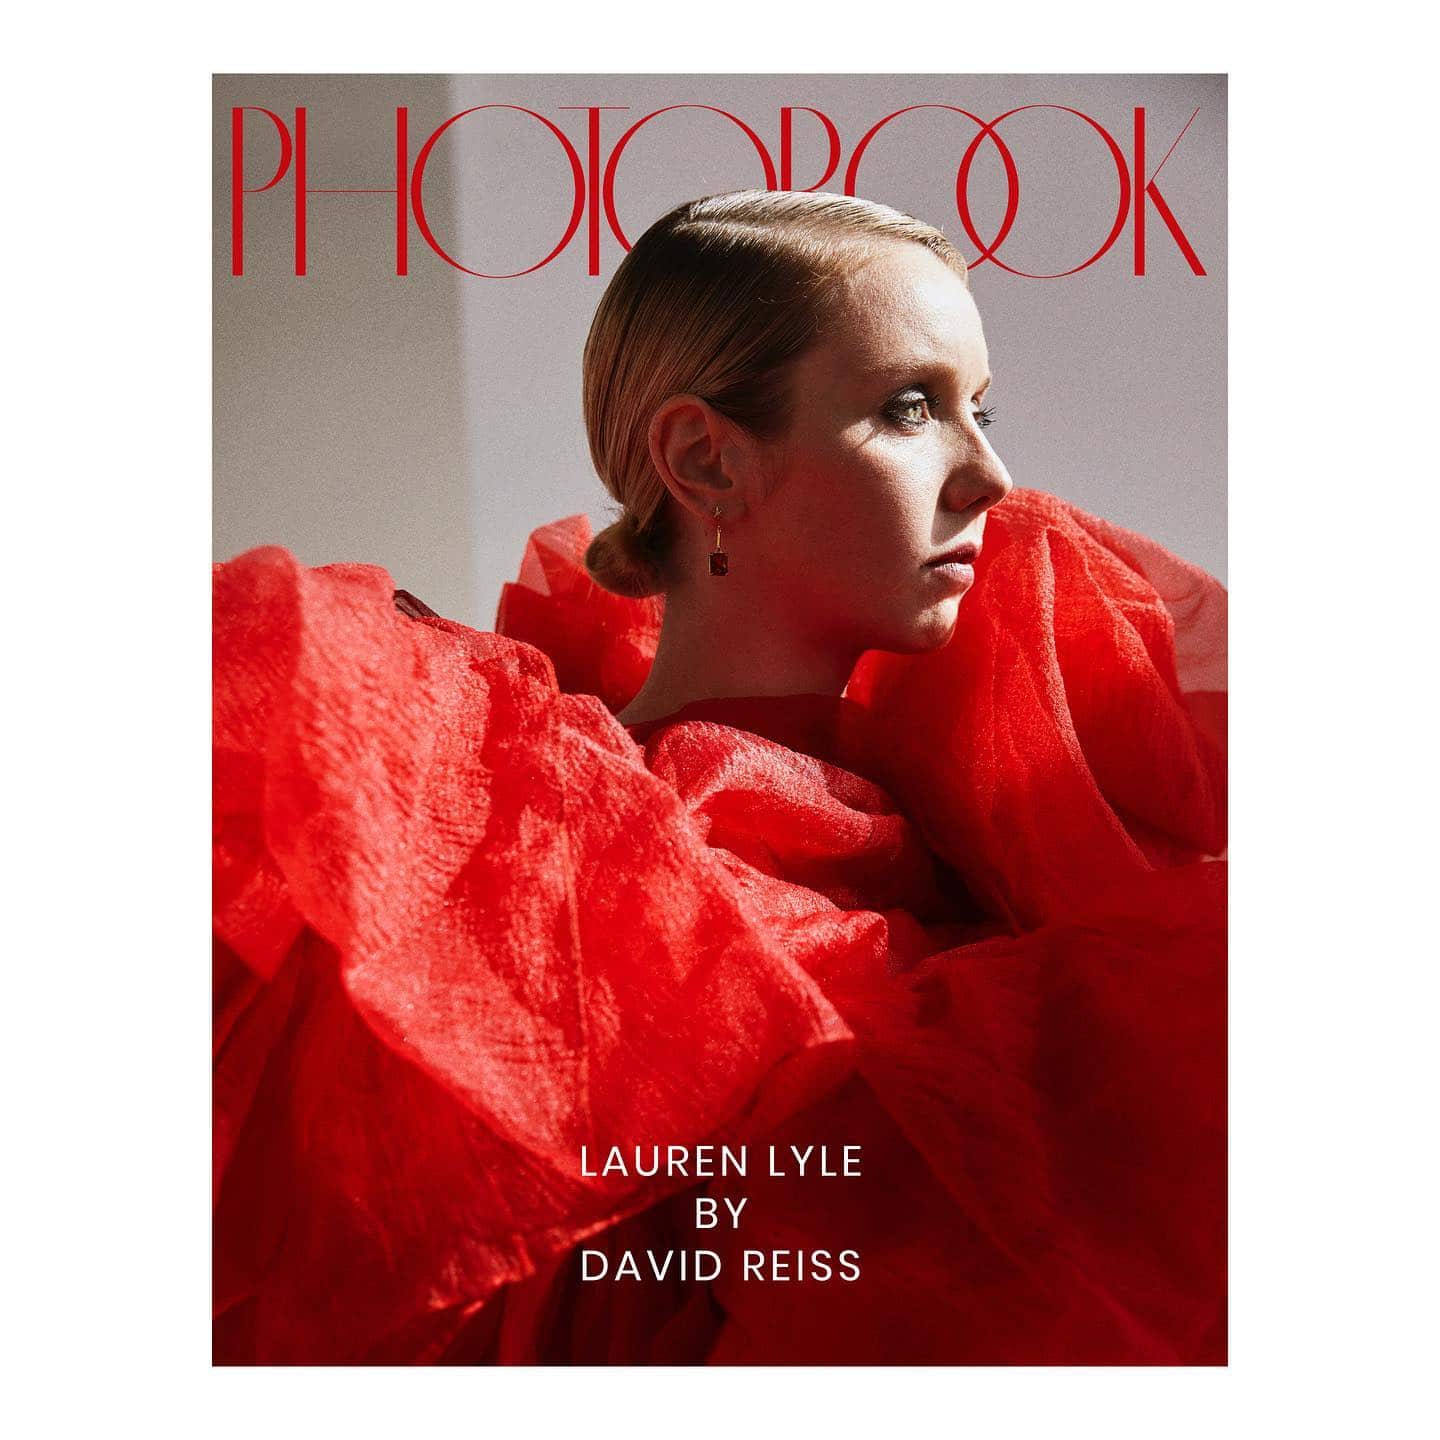 @laurenlyle7 on the cover of @photobookmagazine discussing her lead role in Karen Pirie. Available now to watch on Britbox in the US and ITV catch up in the UK 
.
.
.
📸 @davidreissphotography 
‍♀️ @joepickeringtaylor 
 @emilysusantighe 
✍️ @siennajanette
.
.
.